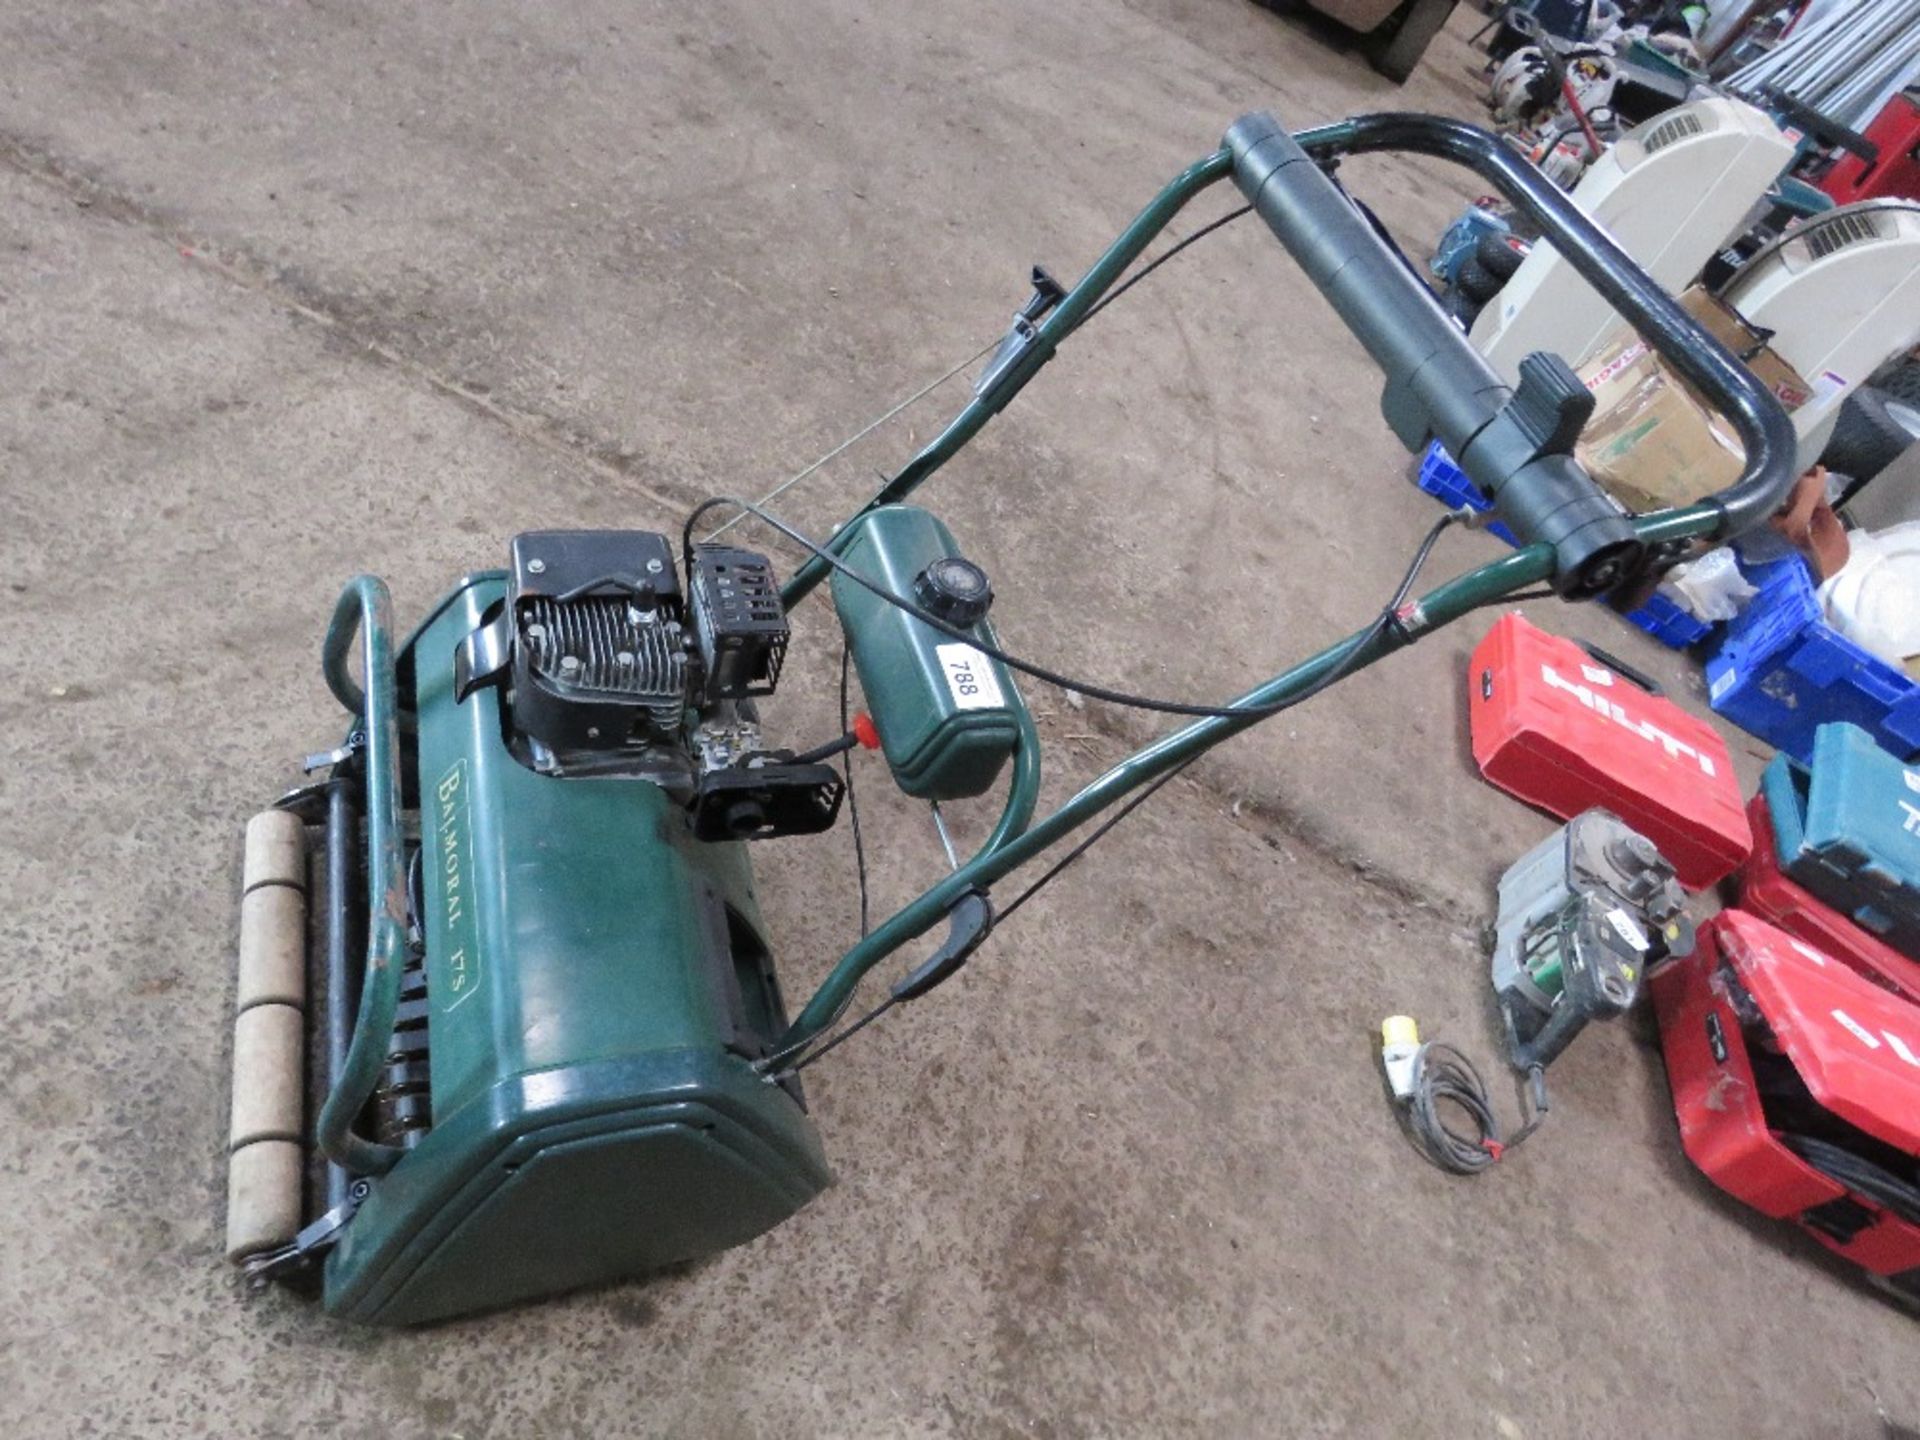 CYLINDER MOWER WITH RAKING / DE-THATCHING ATTACHMENT.